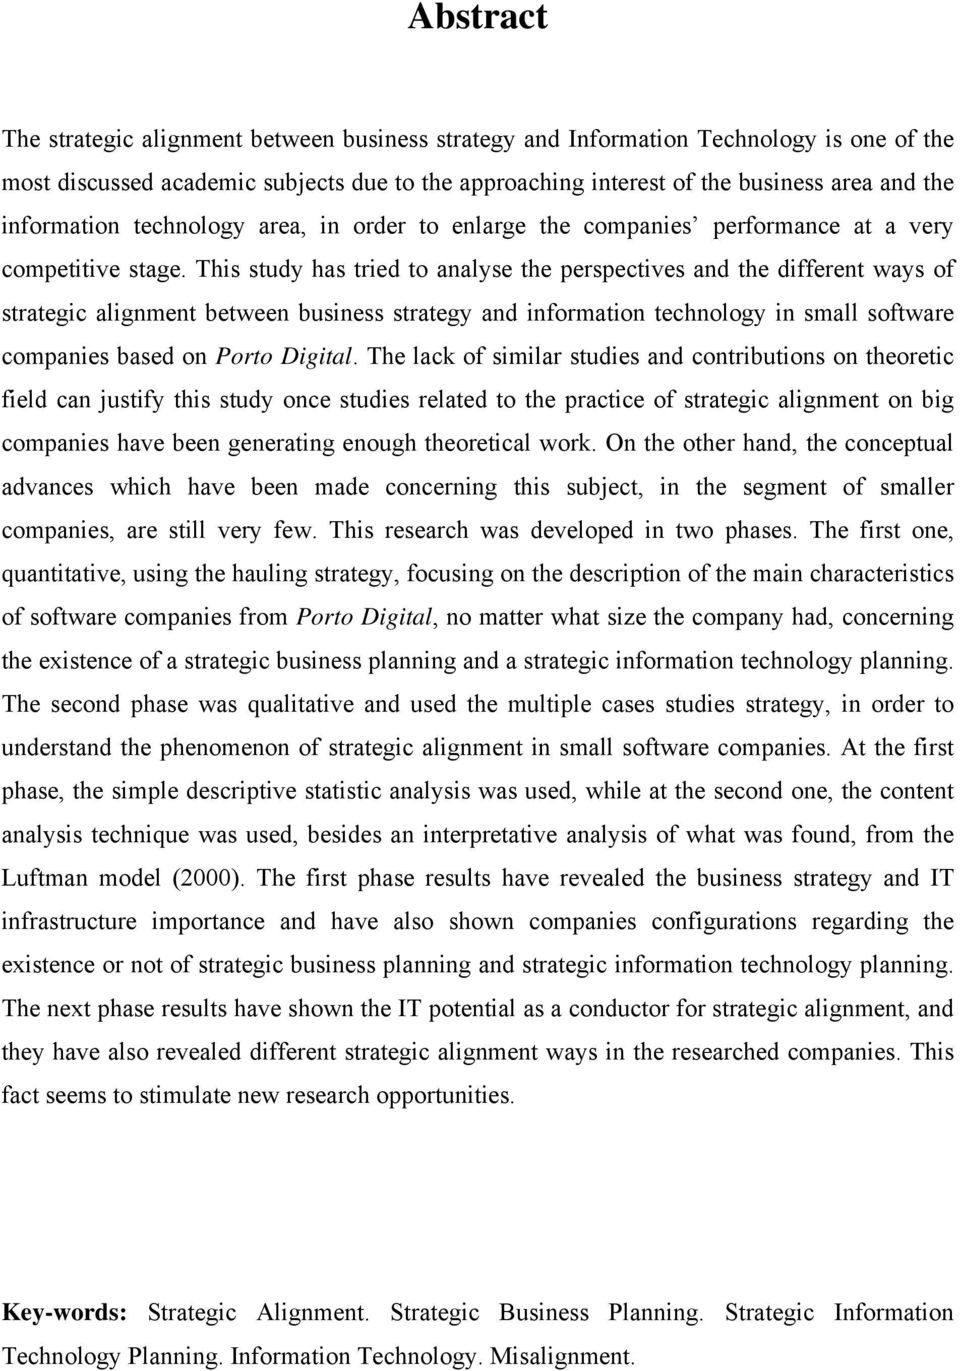 This study has tried to analyse the perspectives and the different ways of strategic alignment between business strategy and information technology in small software companies based on Porto Digital.